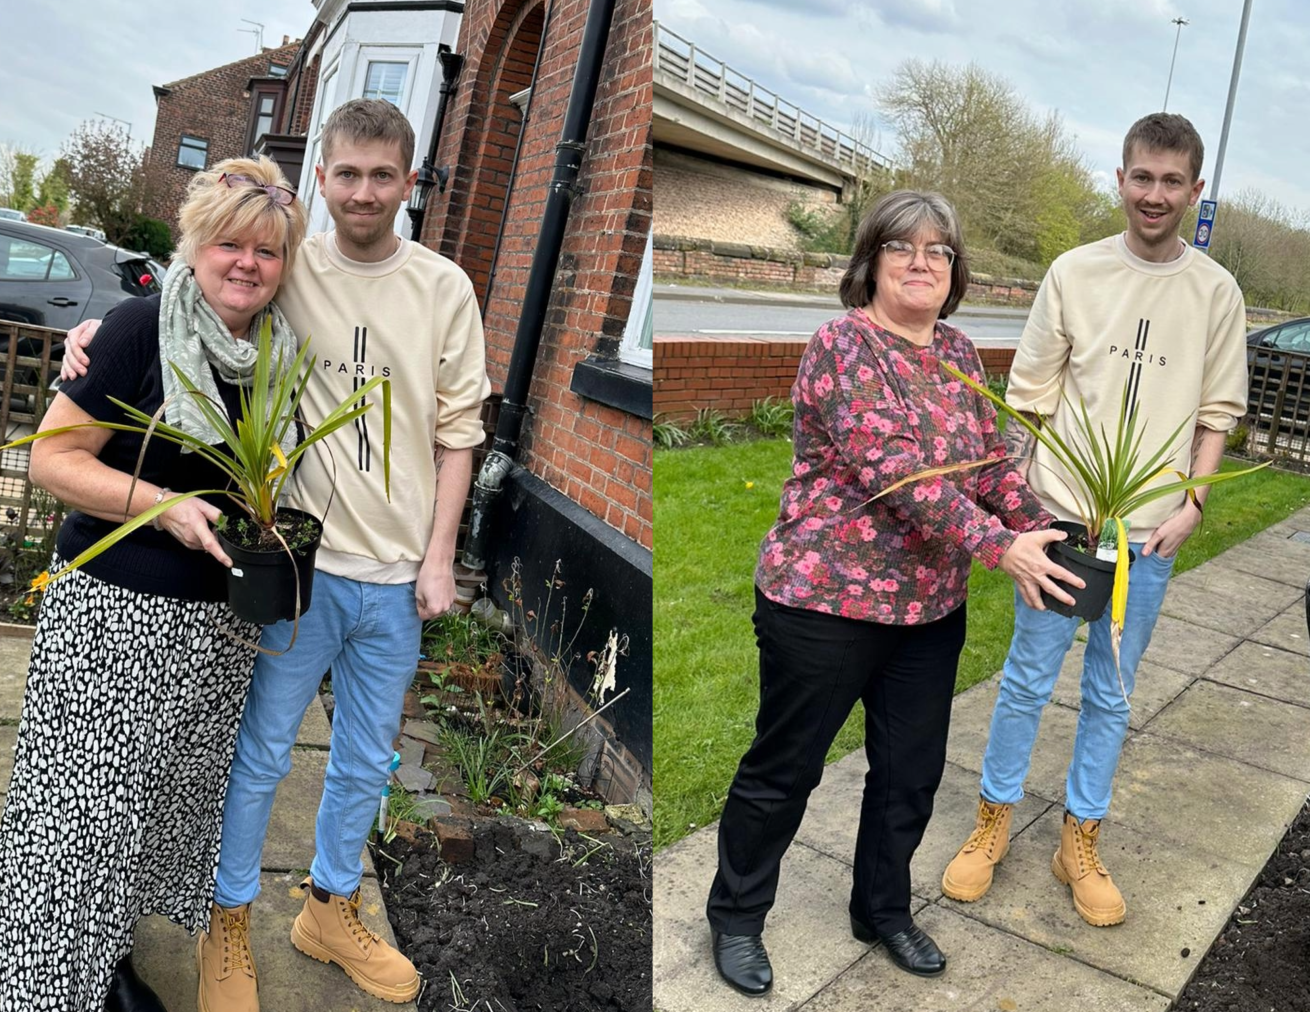 Two photos side by side, both showing a female being handed a plant by a male as a gift